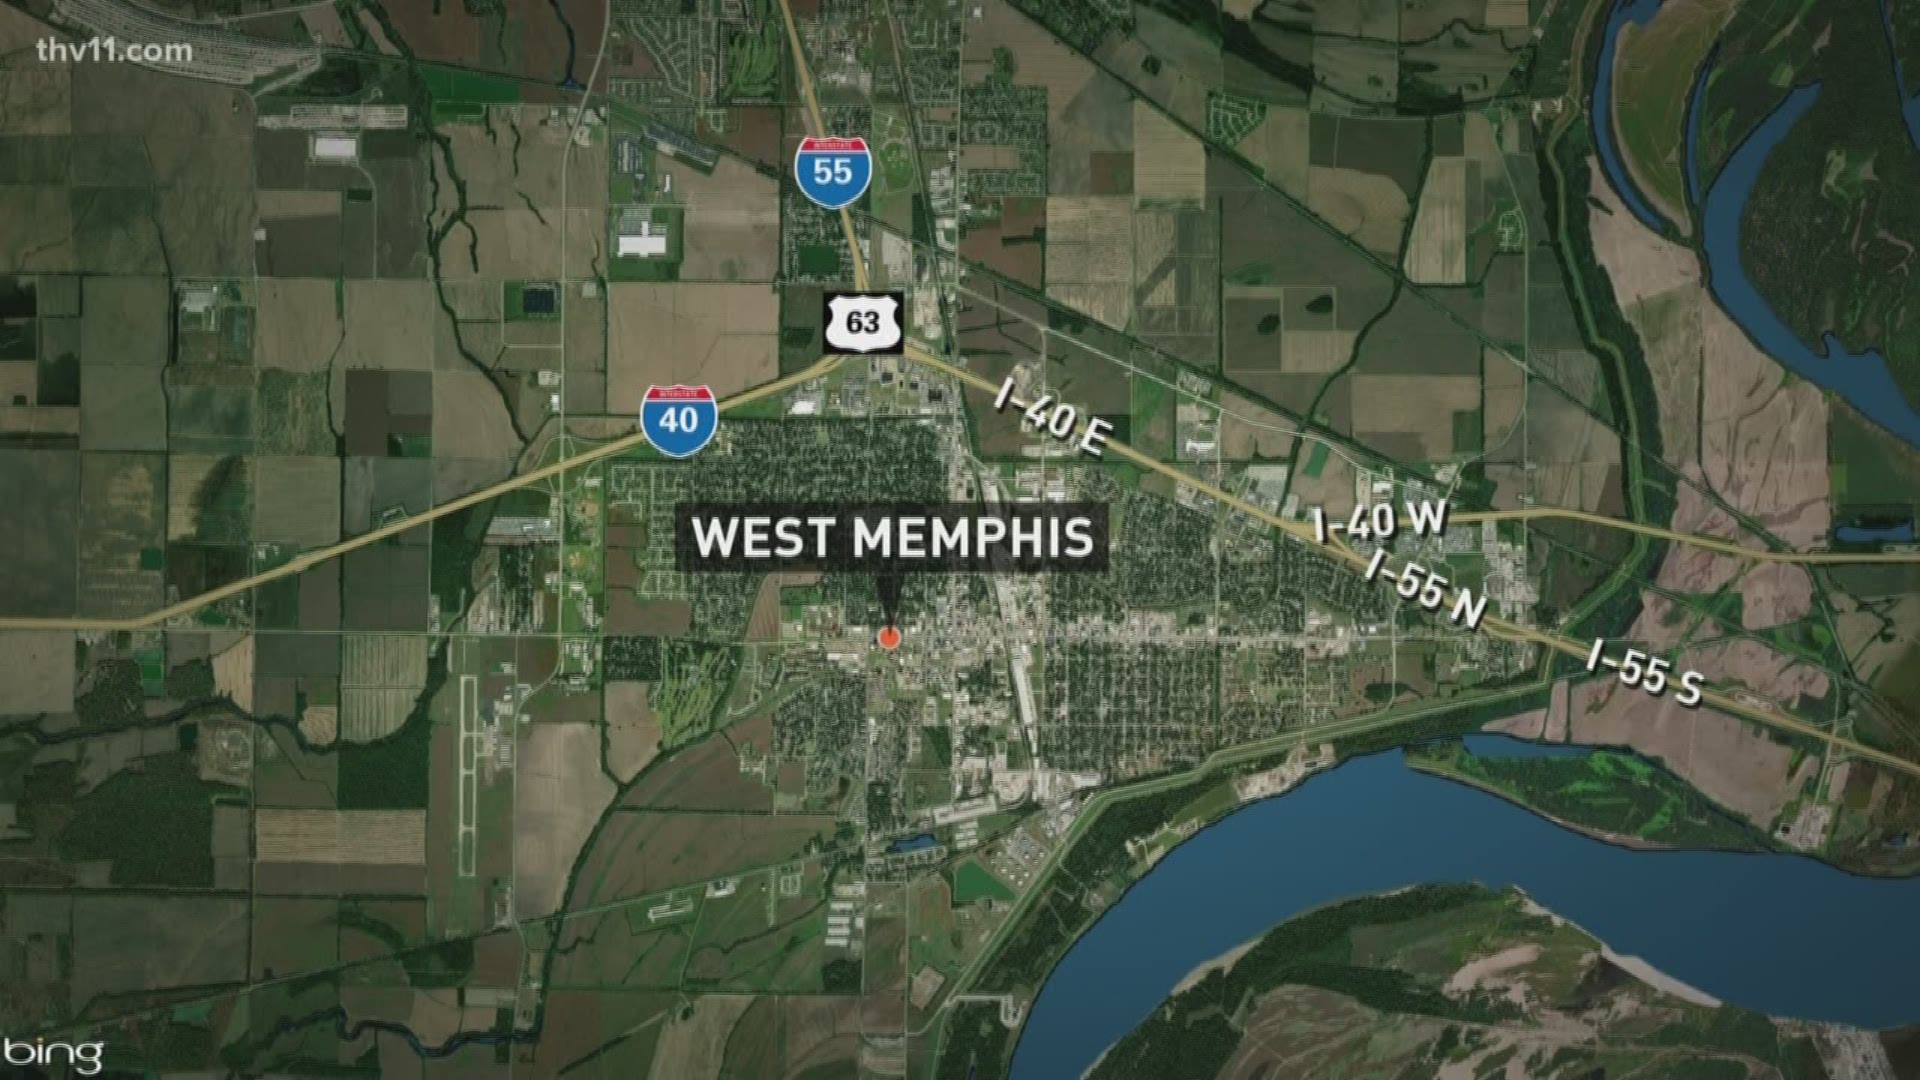 Two people were killed and a police officer injured following a shooting in West Memphis on Wednesday night, Jan. 17.